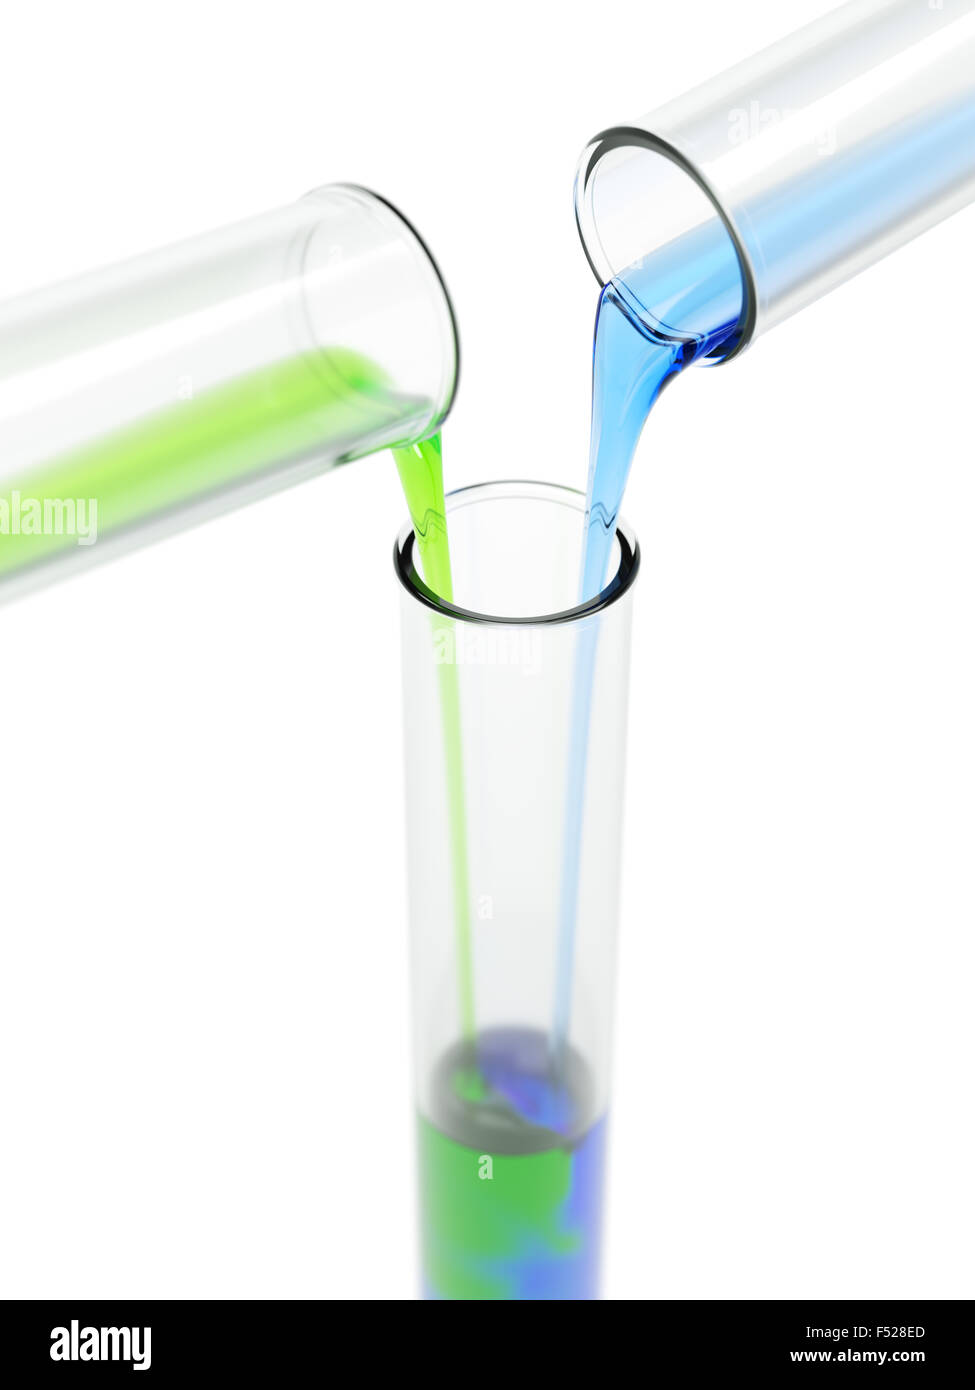 Mixing chemicals on white background Stock Photo - Alamy